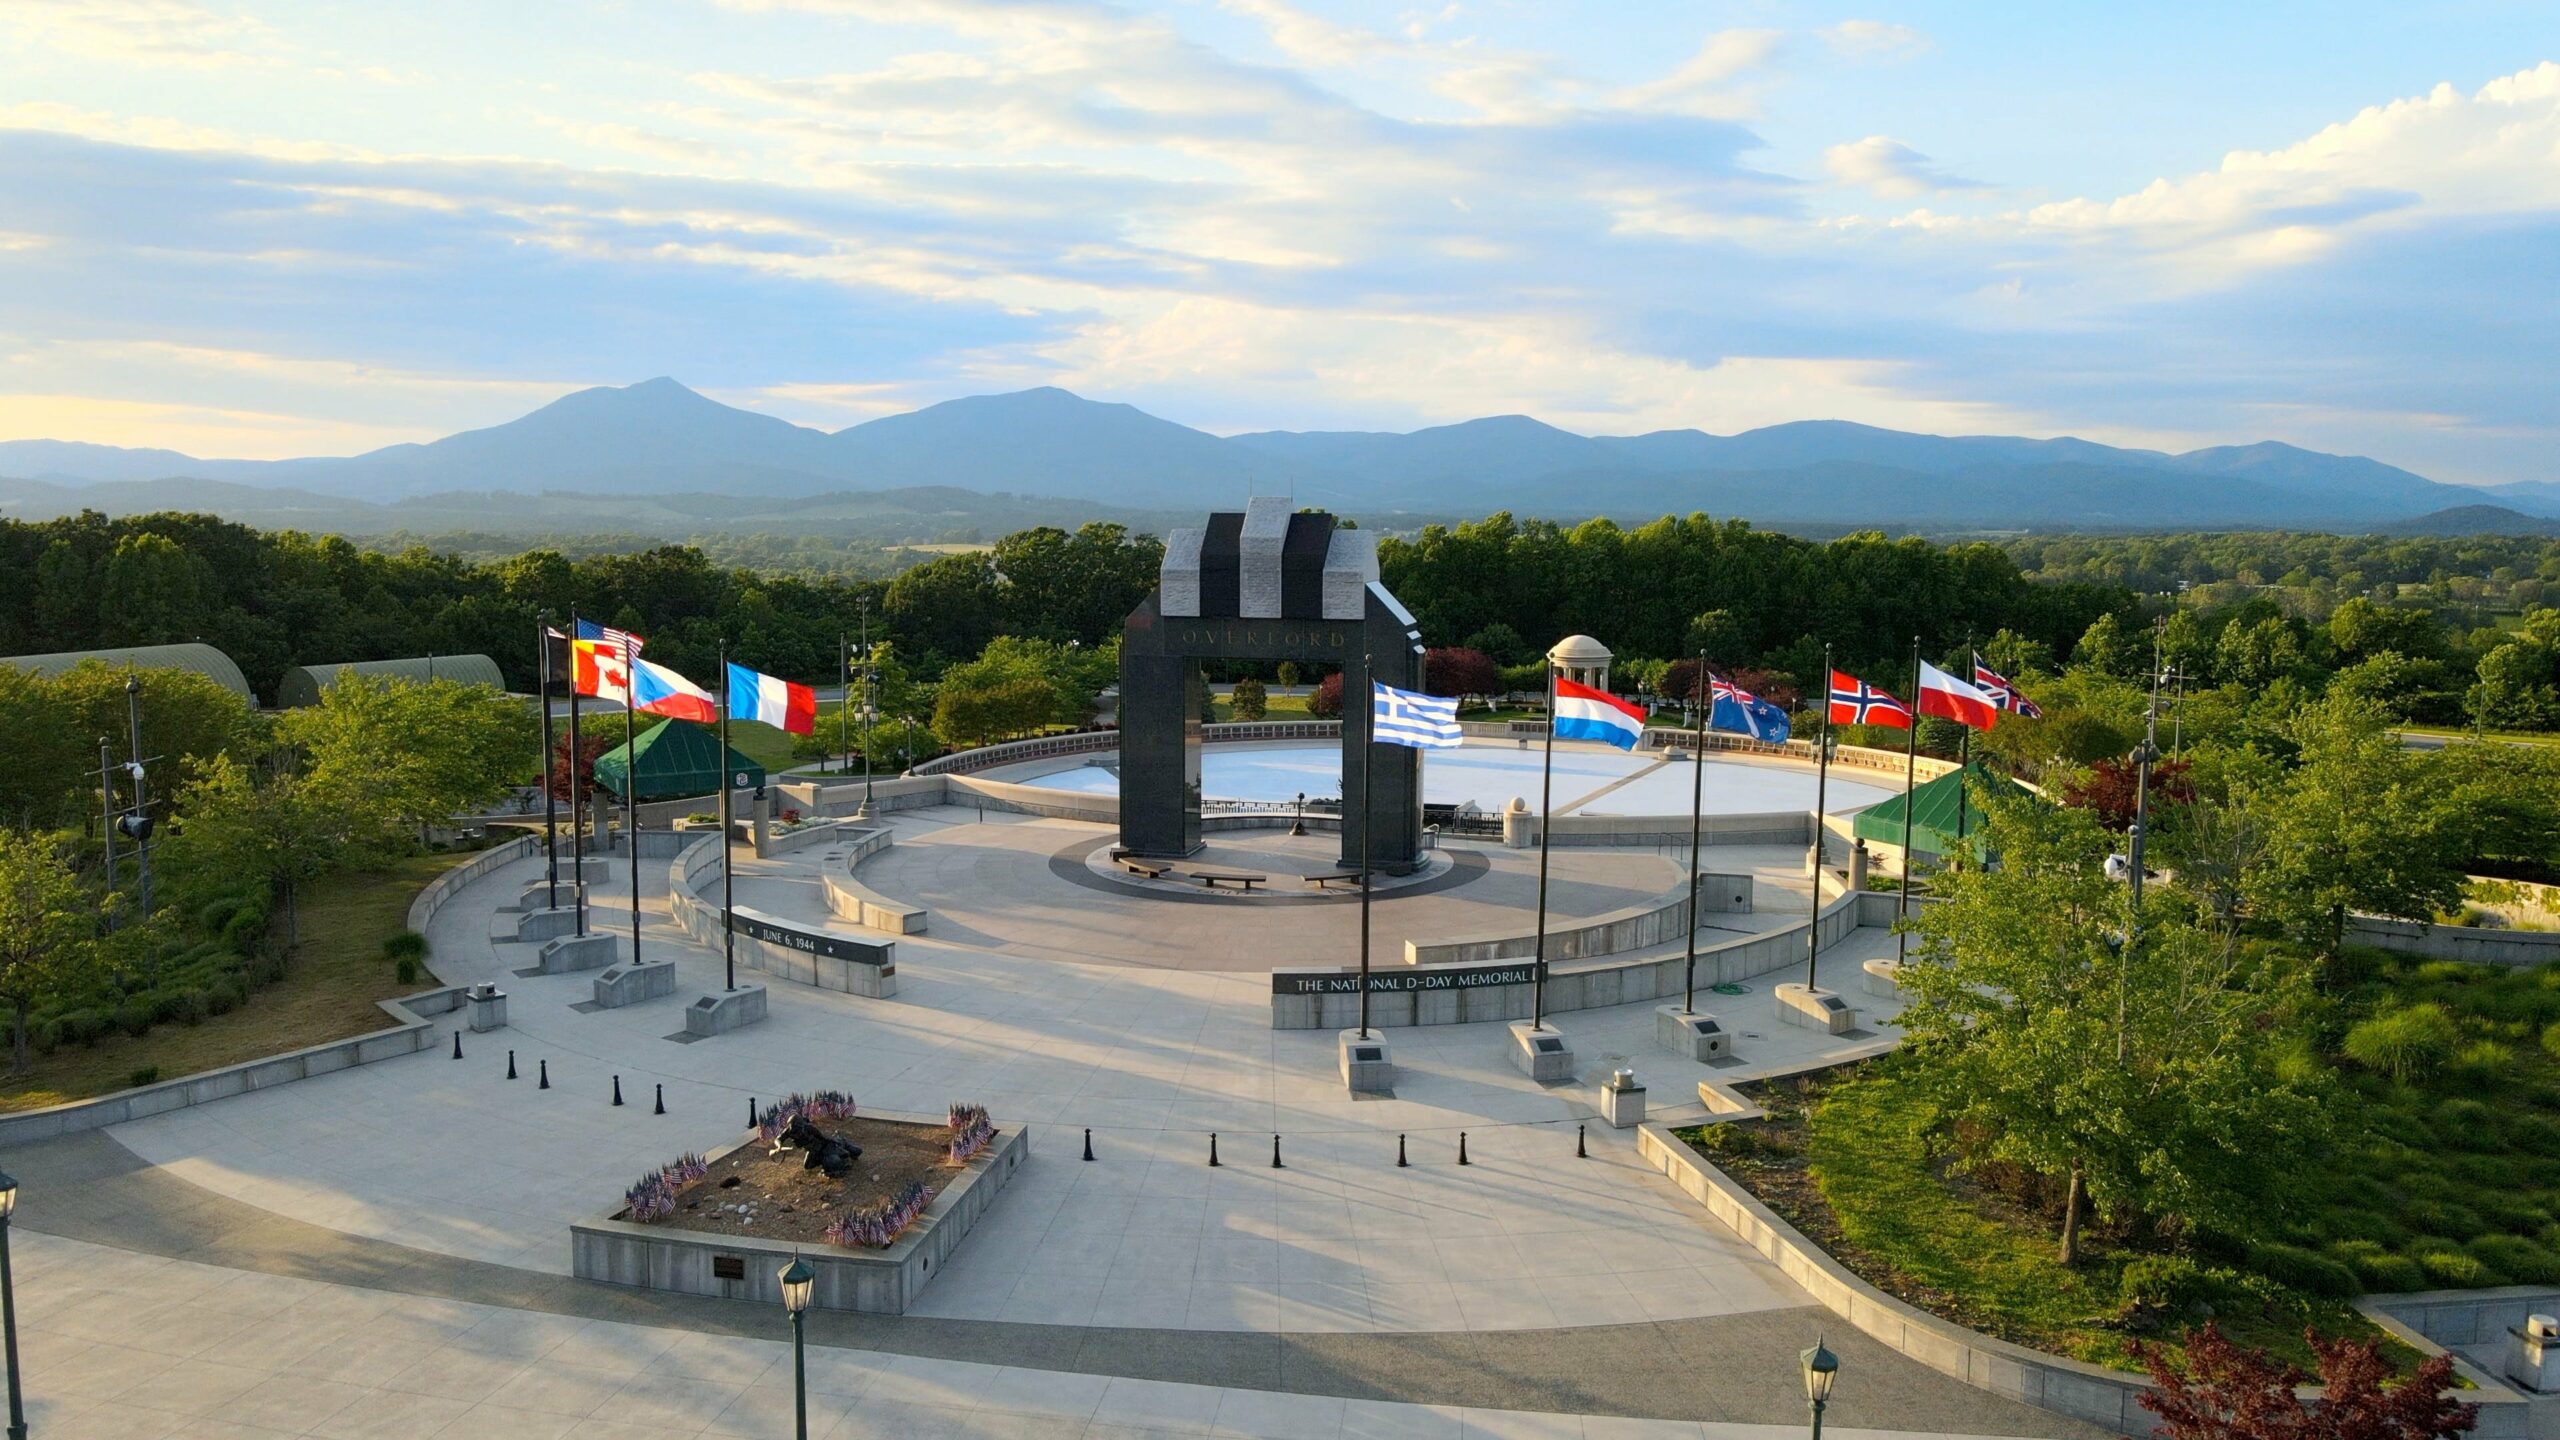 The National D-Day Memorial is seen from an elevated view, with blue sky, mountains, and trees surrounding it.